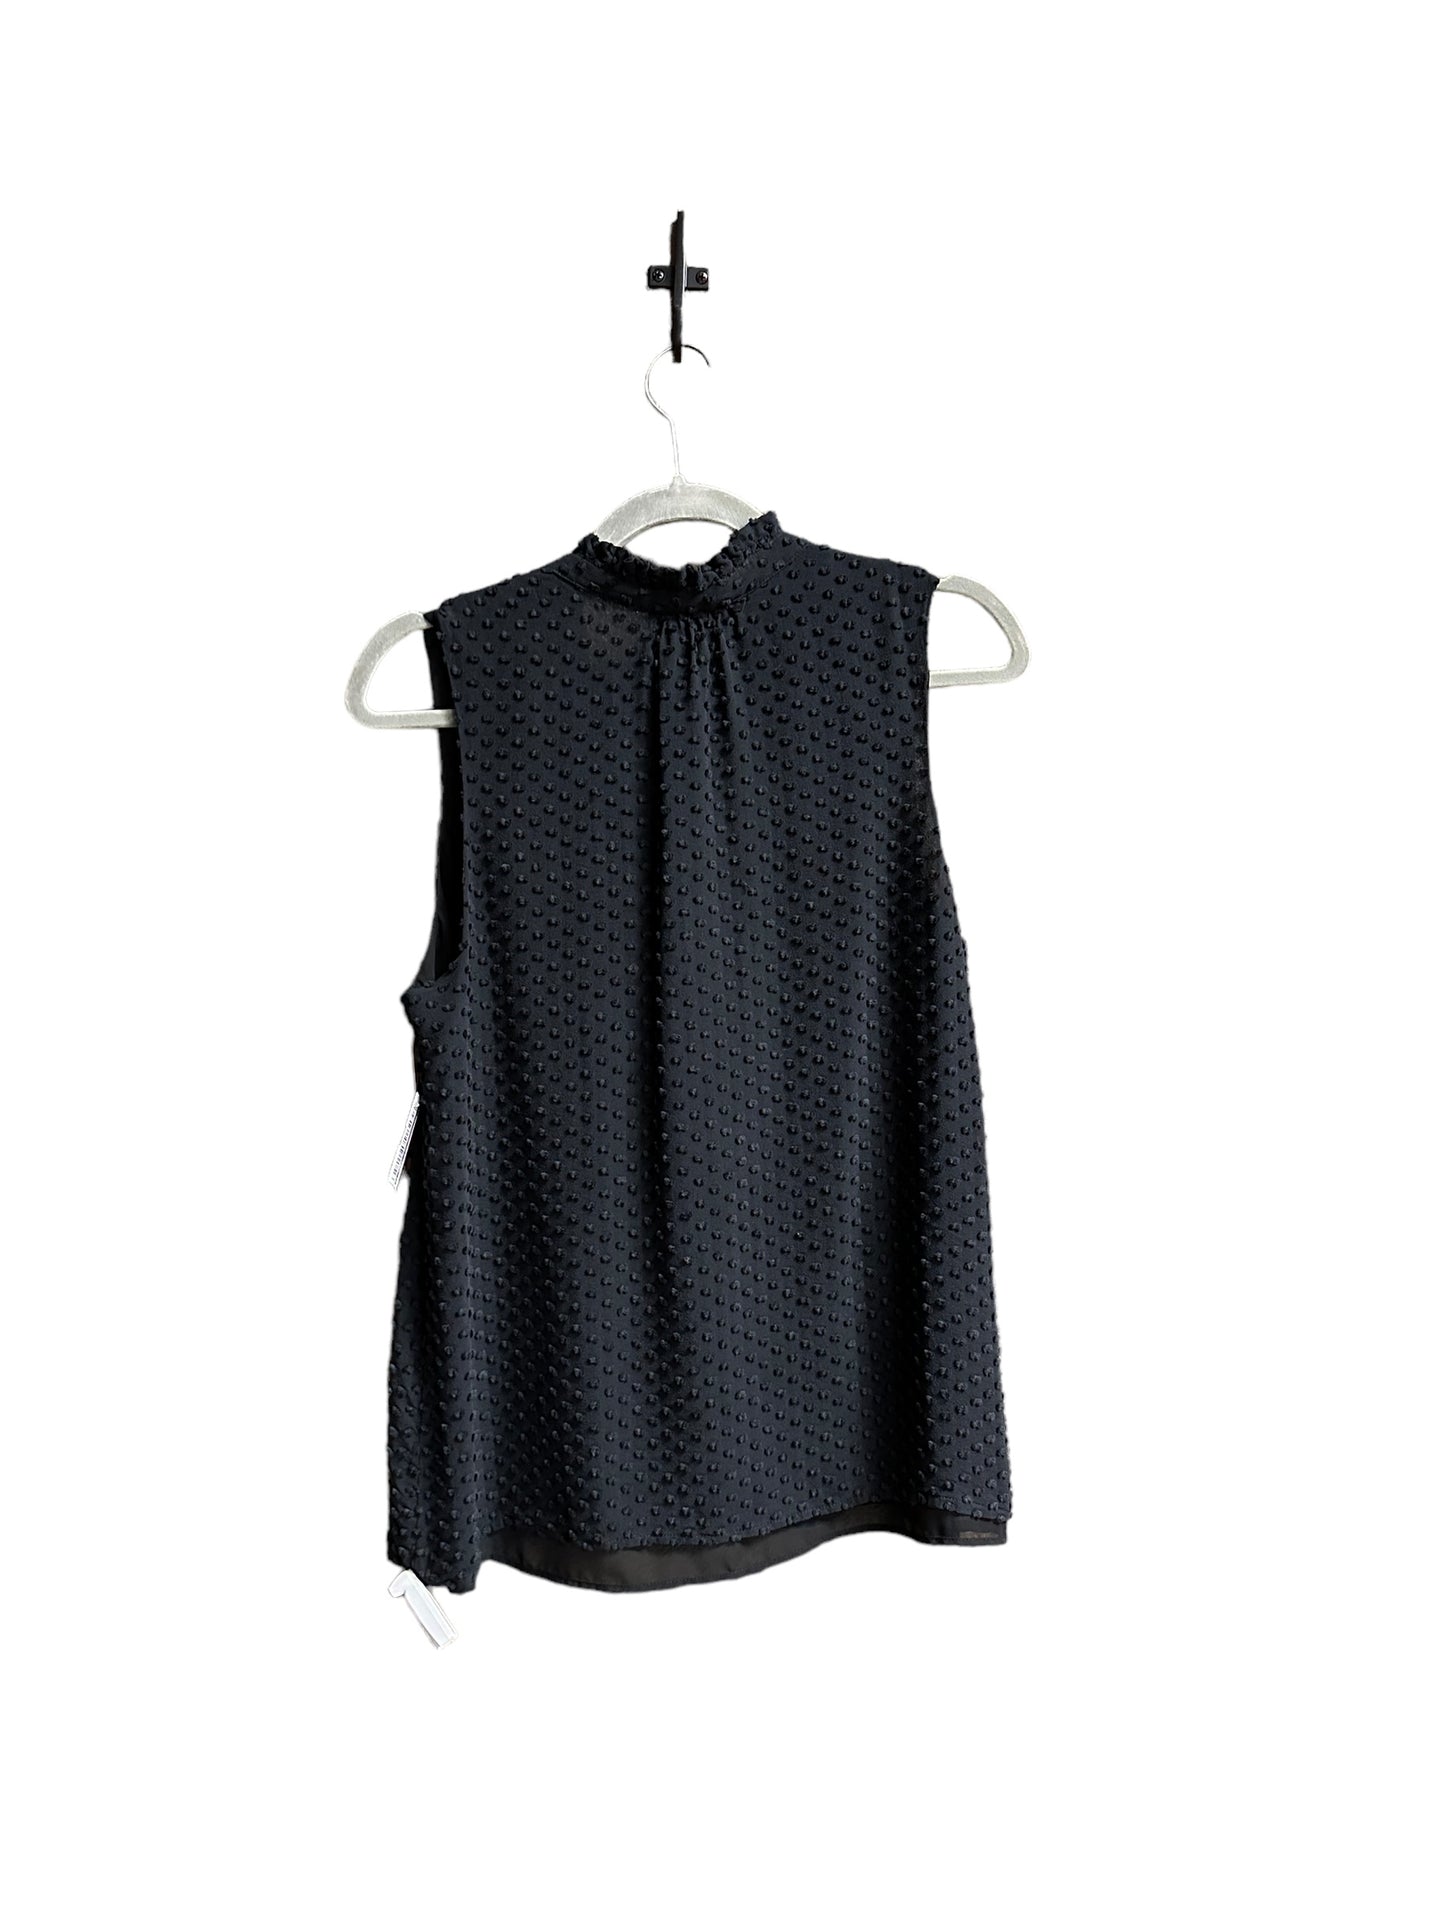 Top Sleeveless By J. Crew  Size: L